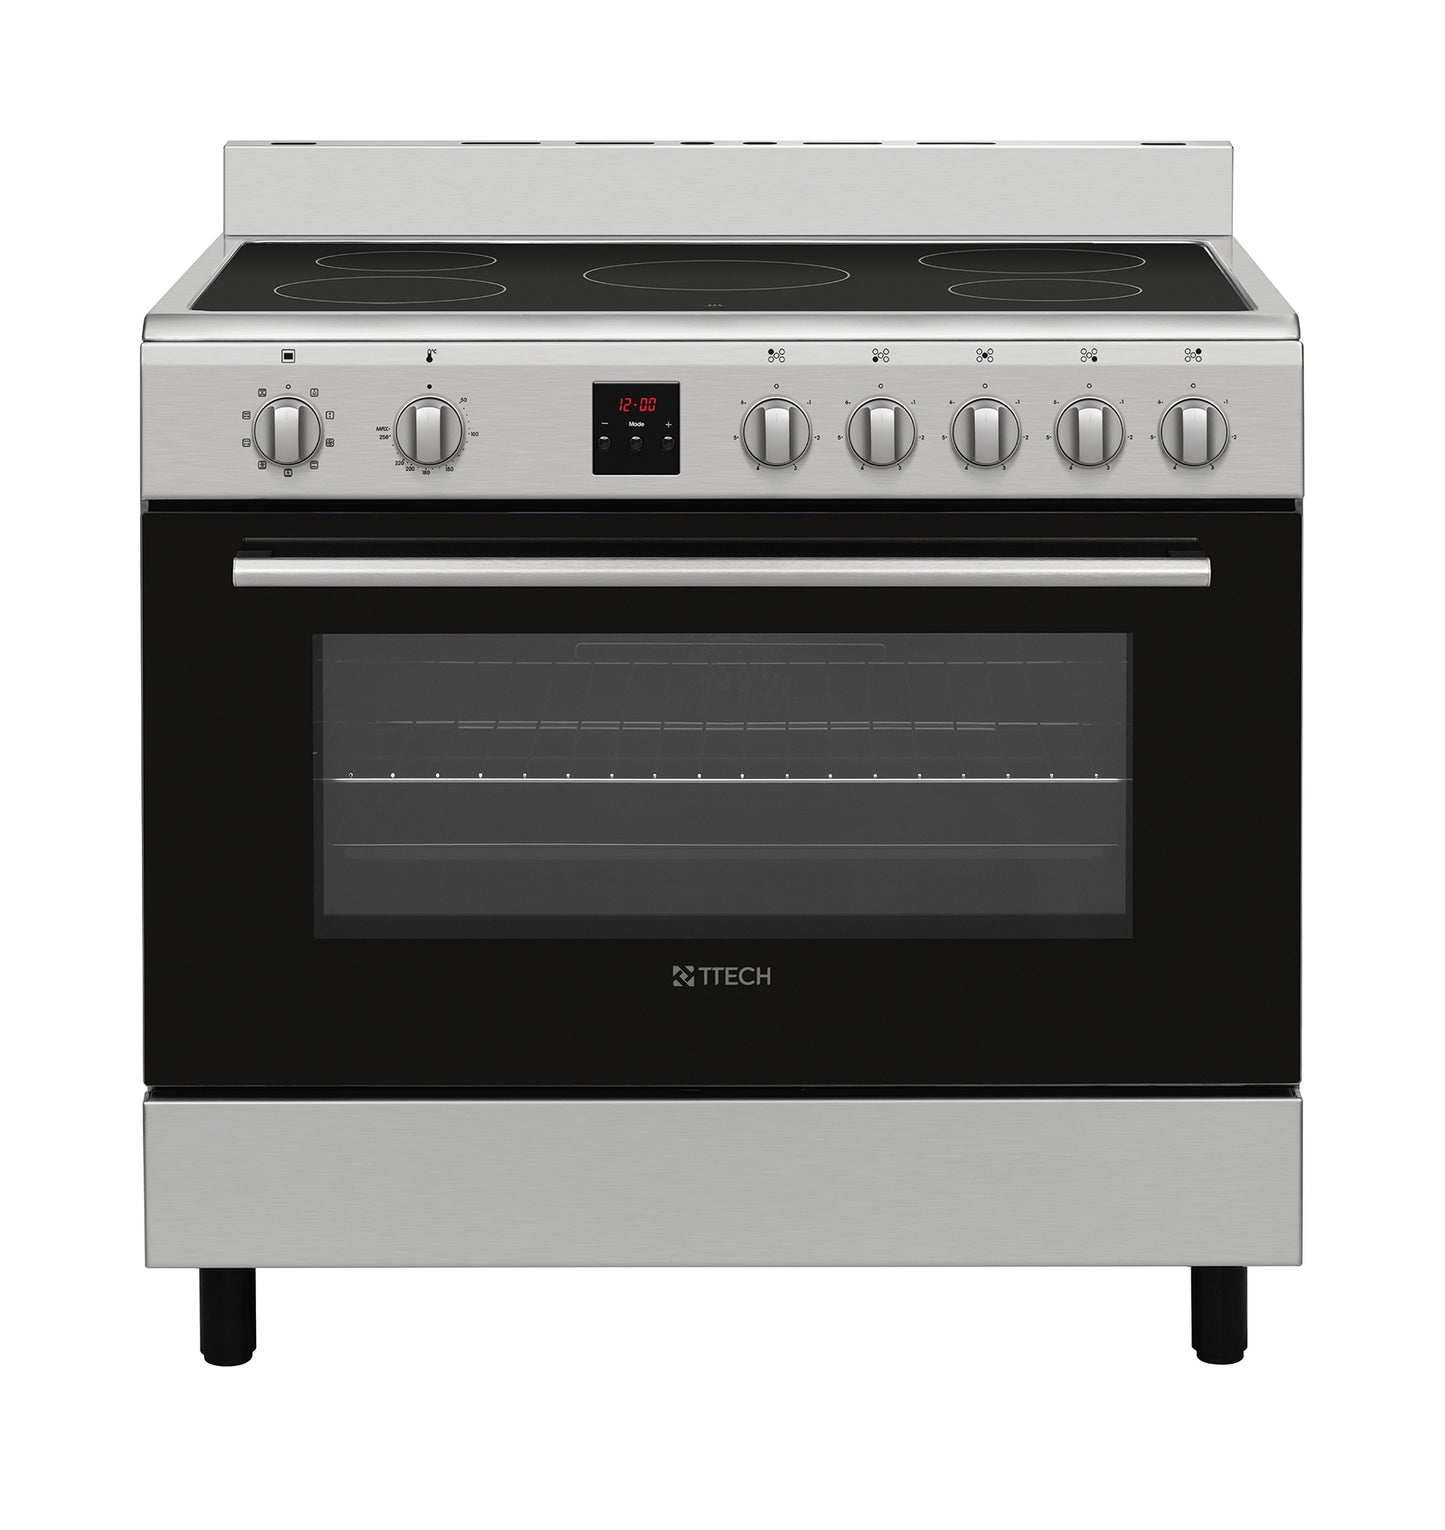 T-TECH FREE STANDING 90X60 ELECTRIC COOKER WITH CERAMIC HOB STANDARD INOX/SILVER COLOR, MODEL